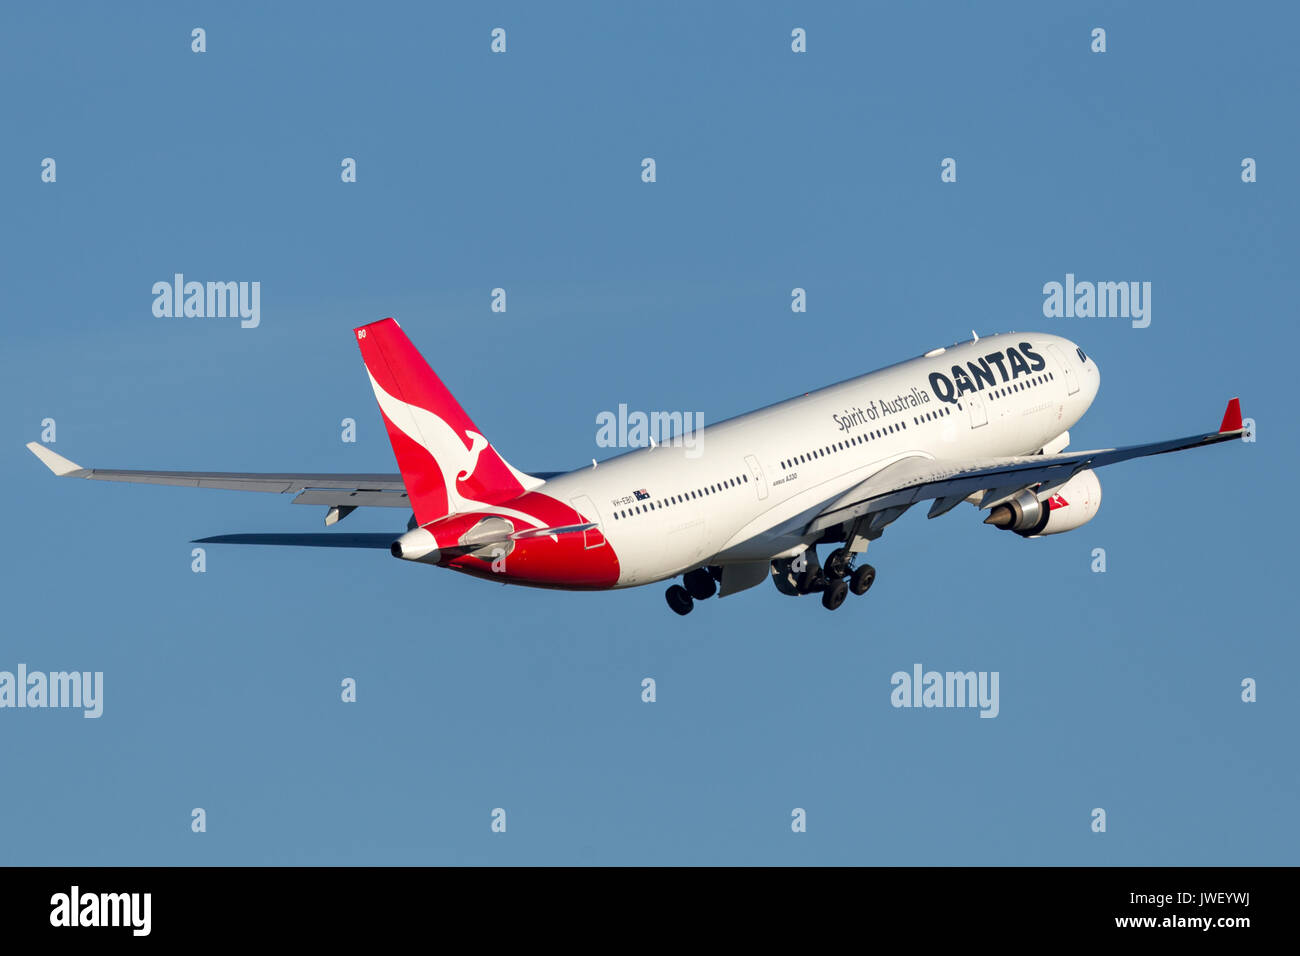 Qantas Airbus A330 aircraft taking off from Sydney Airport. Stock Photo